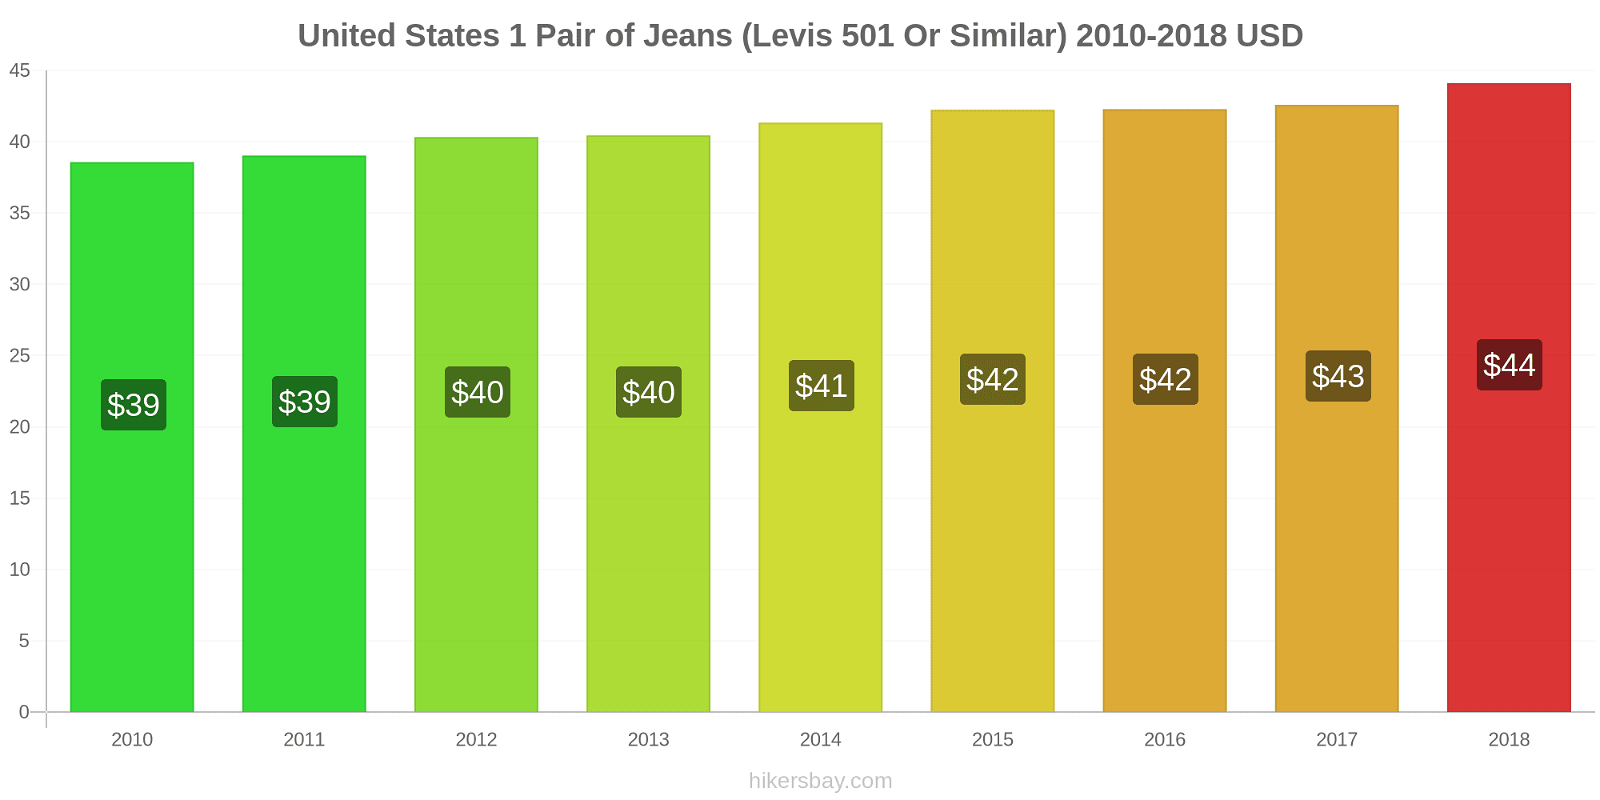 United States price changes 1 pair of jeans (Levis 501 or similar) hikersbay.com